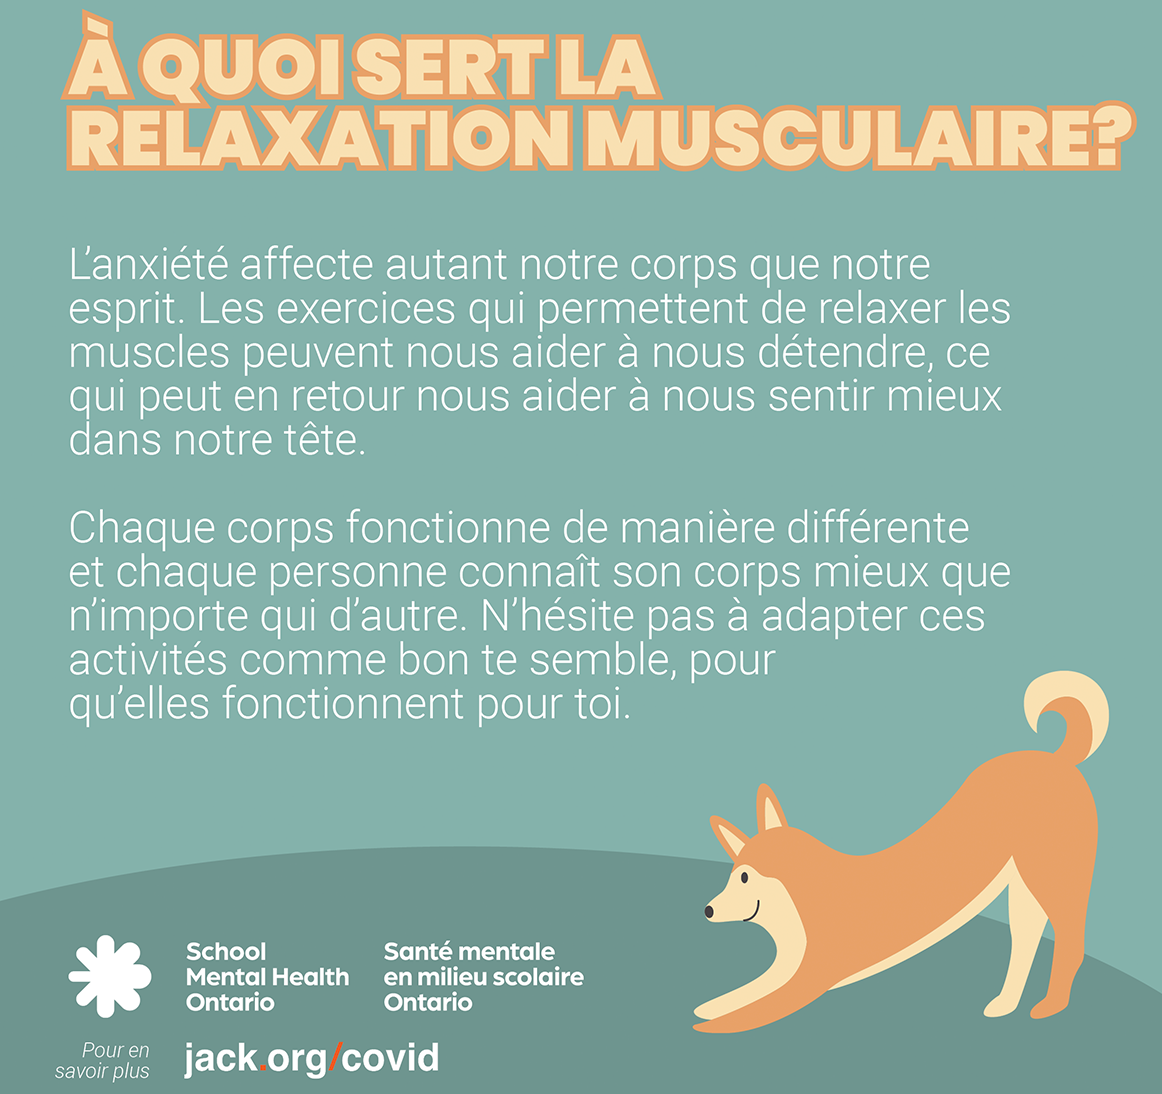 La relaxation musculaire